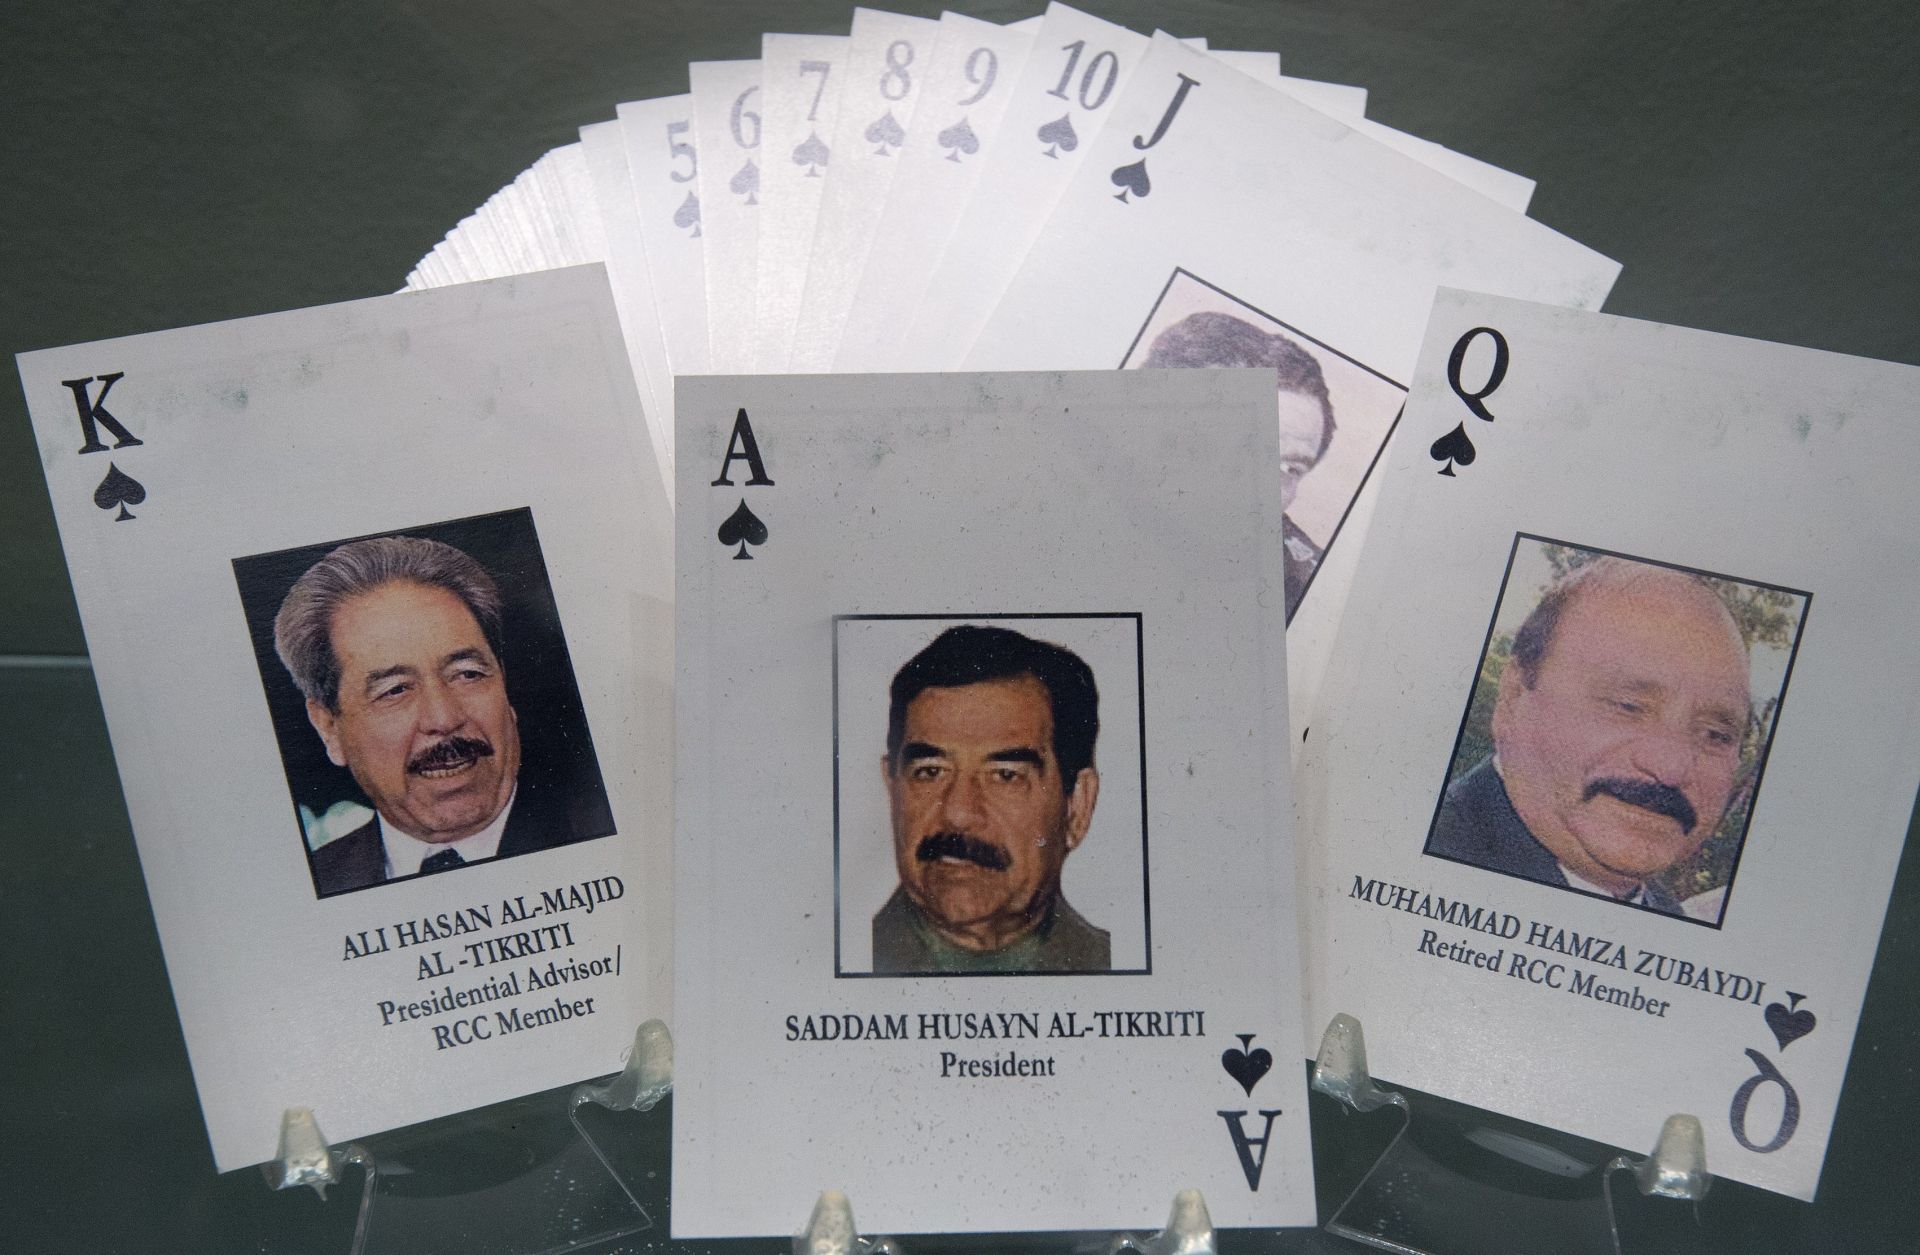 A deck of the "52 most-wanted Iraqi" playing cards from Operation Iraqi Freedom on display in October 2014 at the Pentagon showing high-level members of the Baath Party.